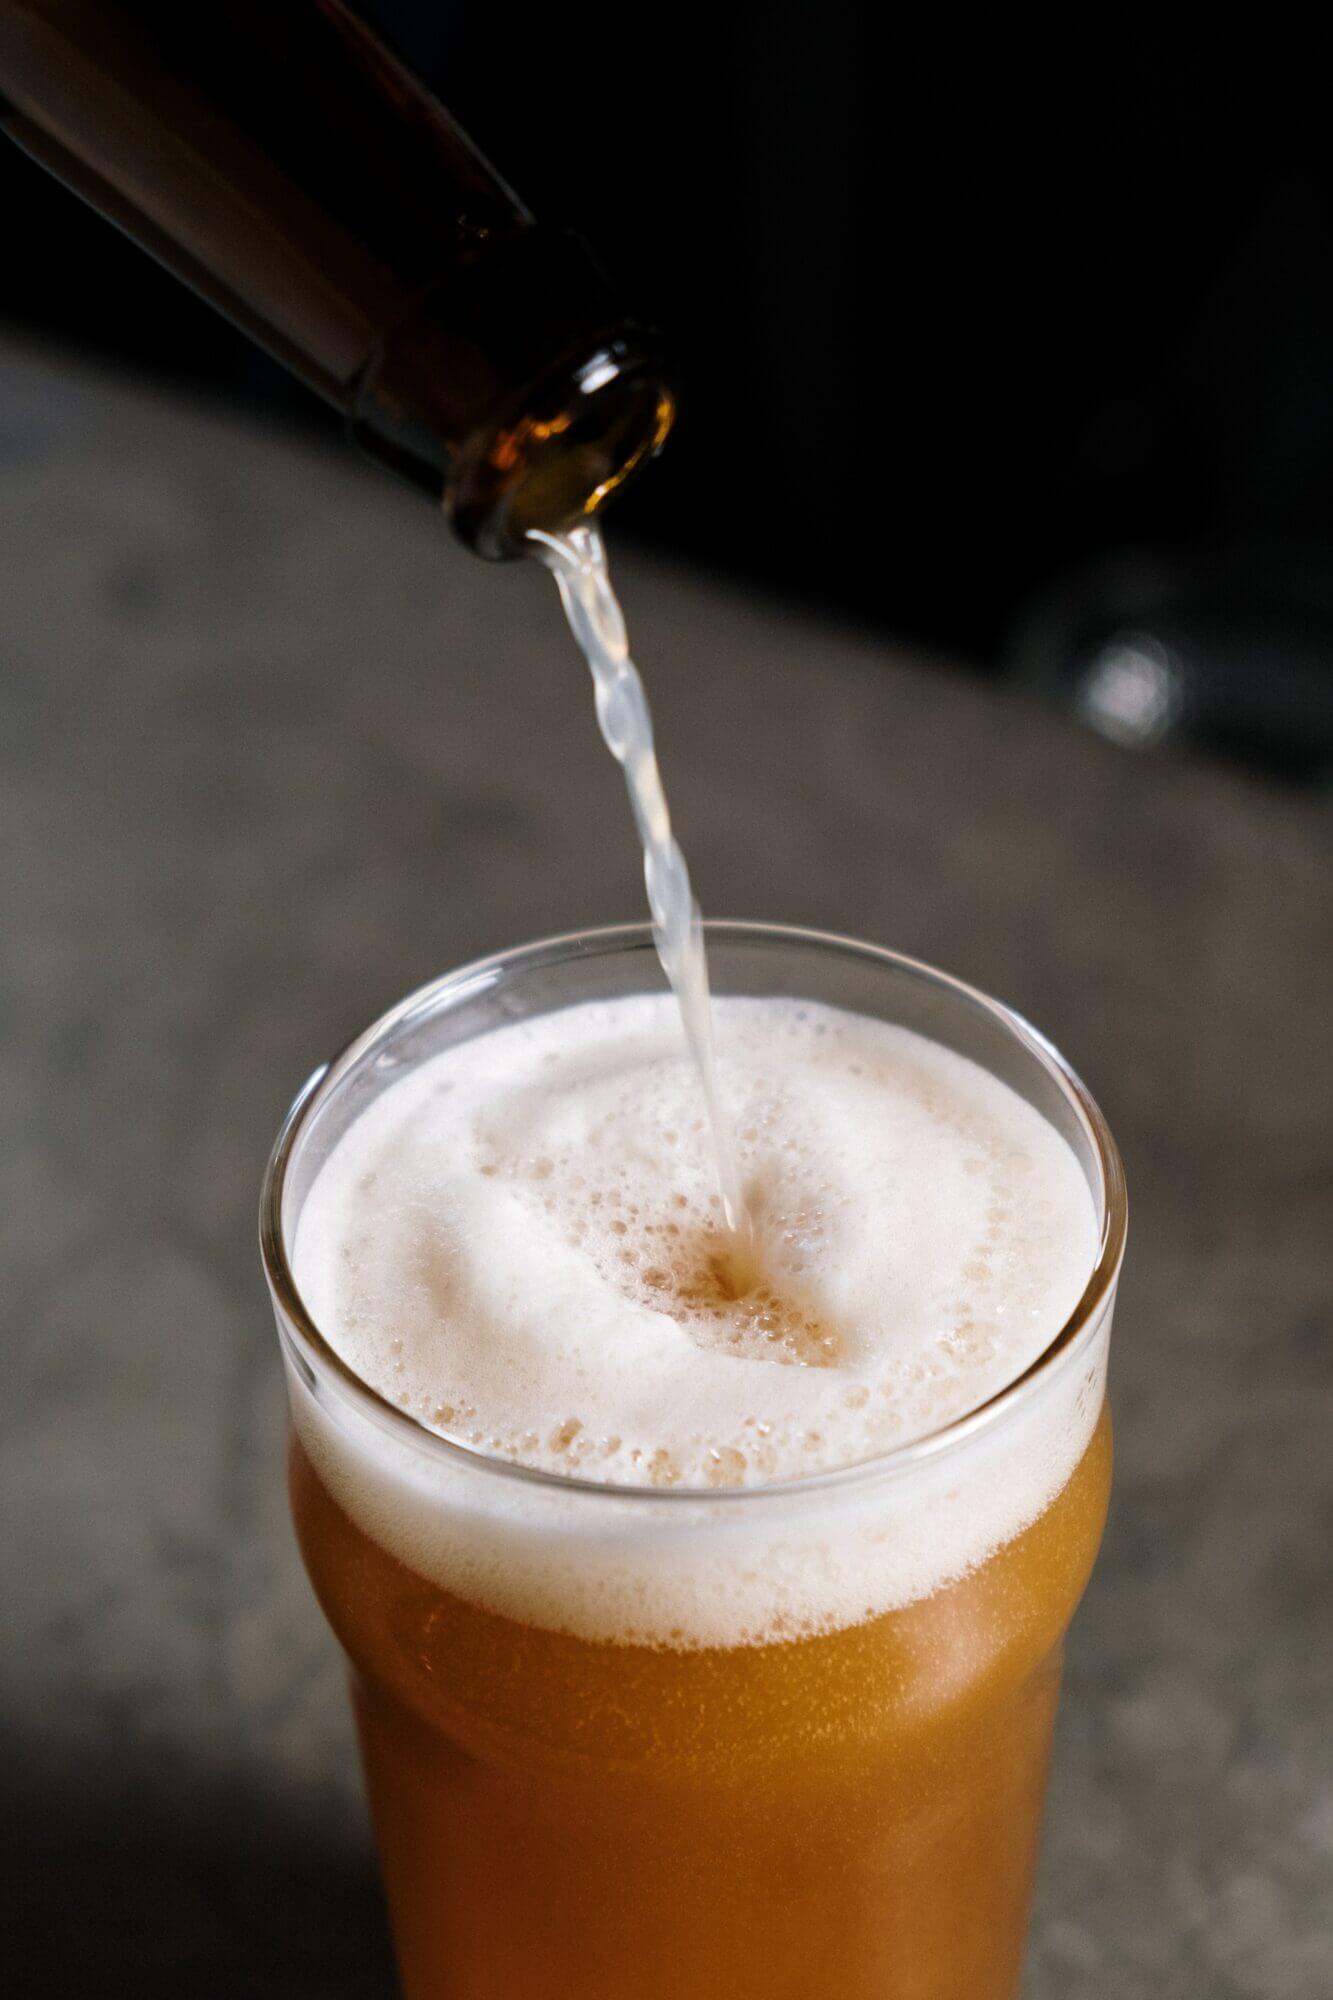 A beer is being poured into a glass.